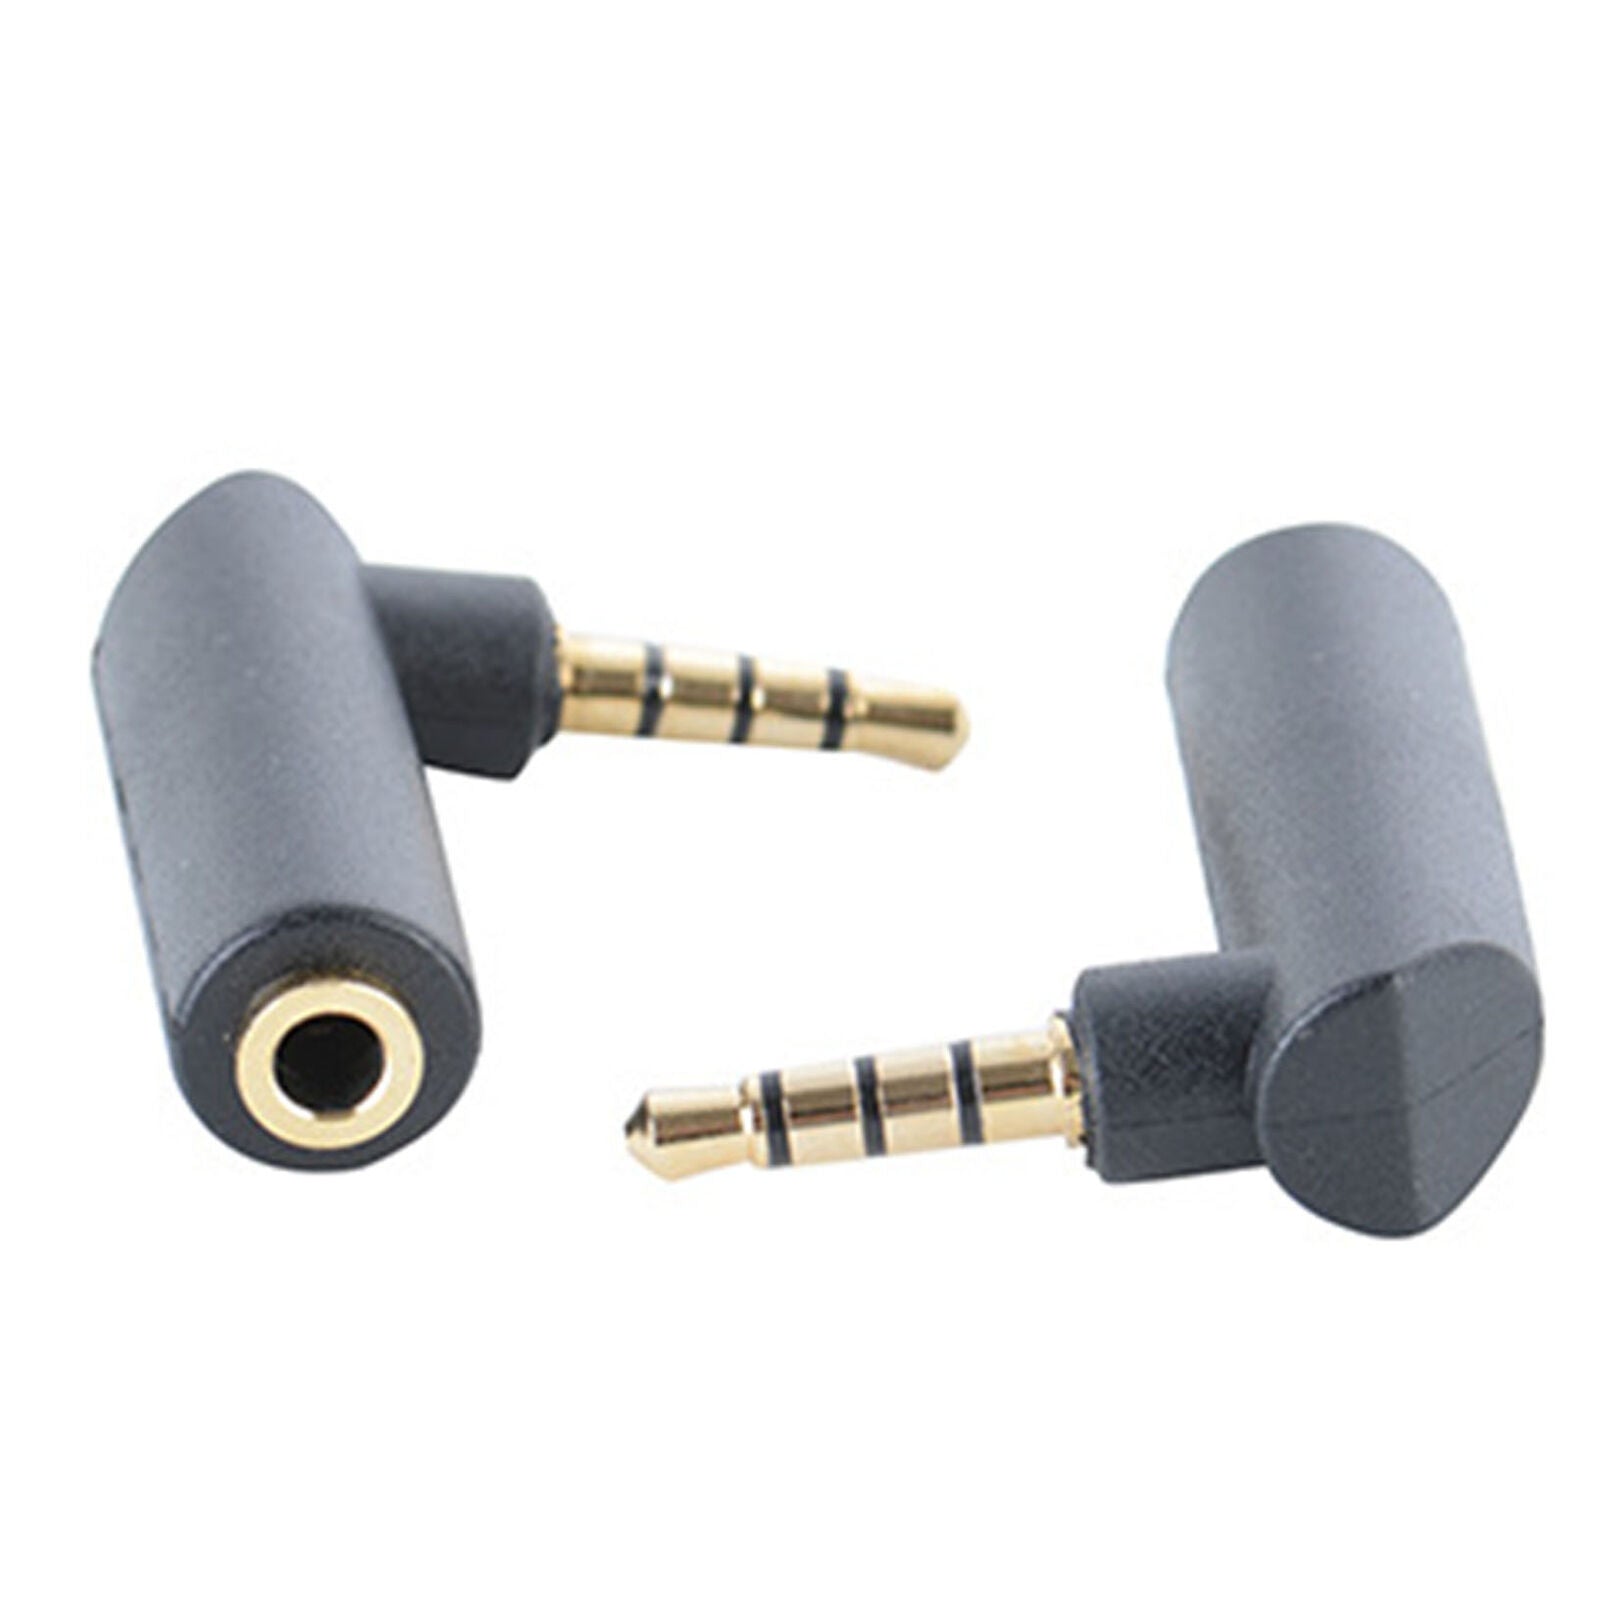 3 Pack of 3.5mm Female to Right Angle Male Headphone Adapters - 90 Degree Aux